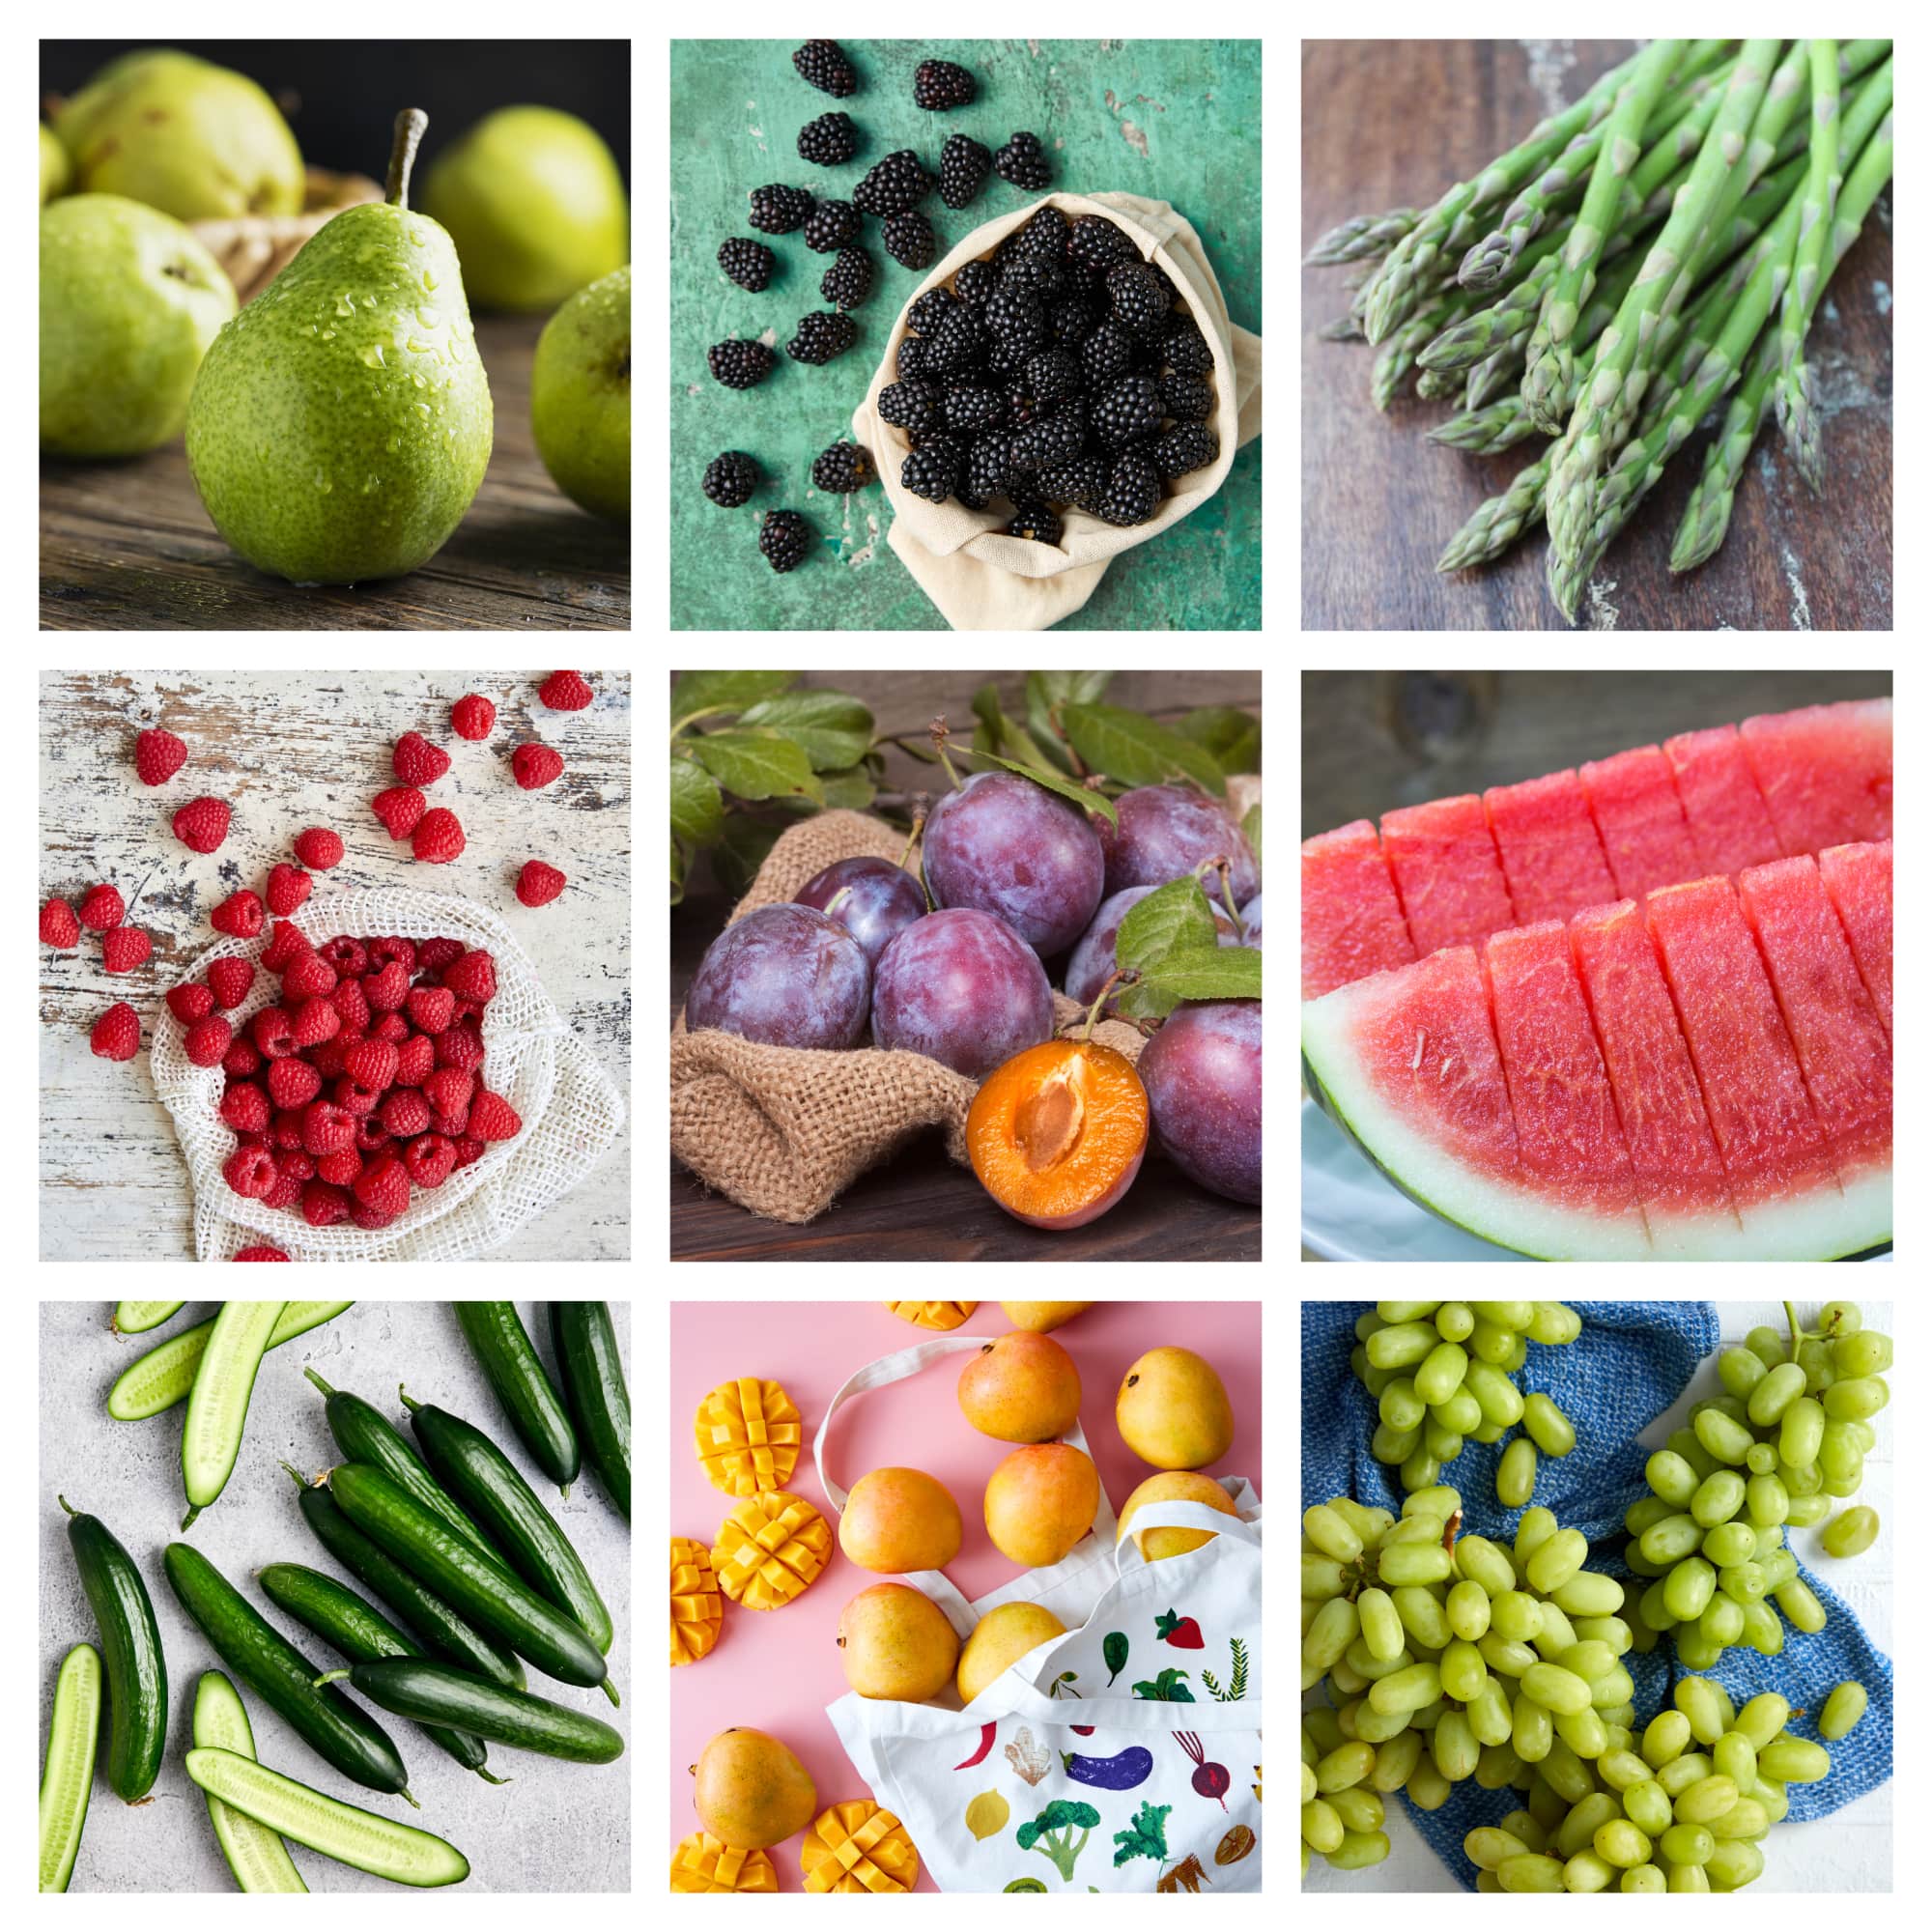 Dave's Market Update for 28th February 2024 includes William pears, blackberries, asparagus, raspberries, Tegan blue plums, watermelon, cucumbers, KP mangoes, and grapes